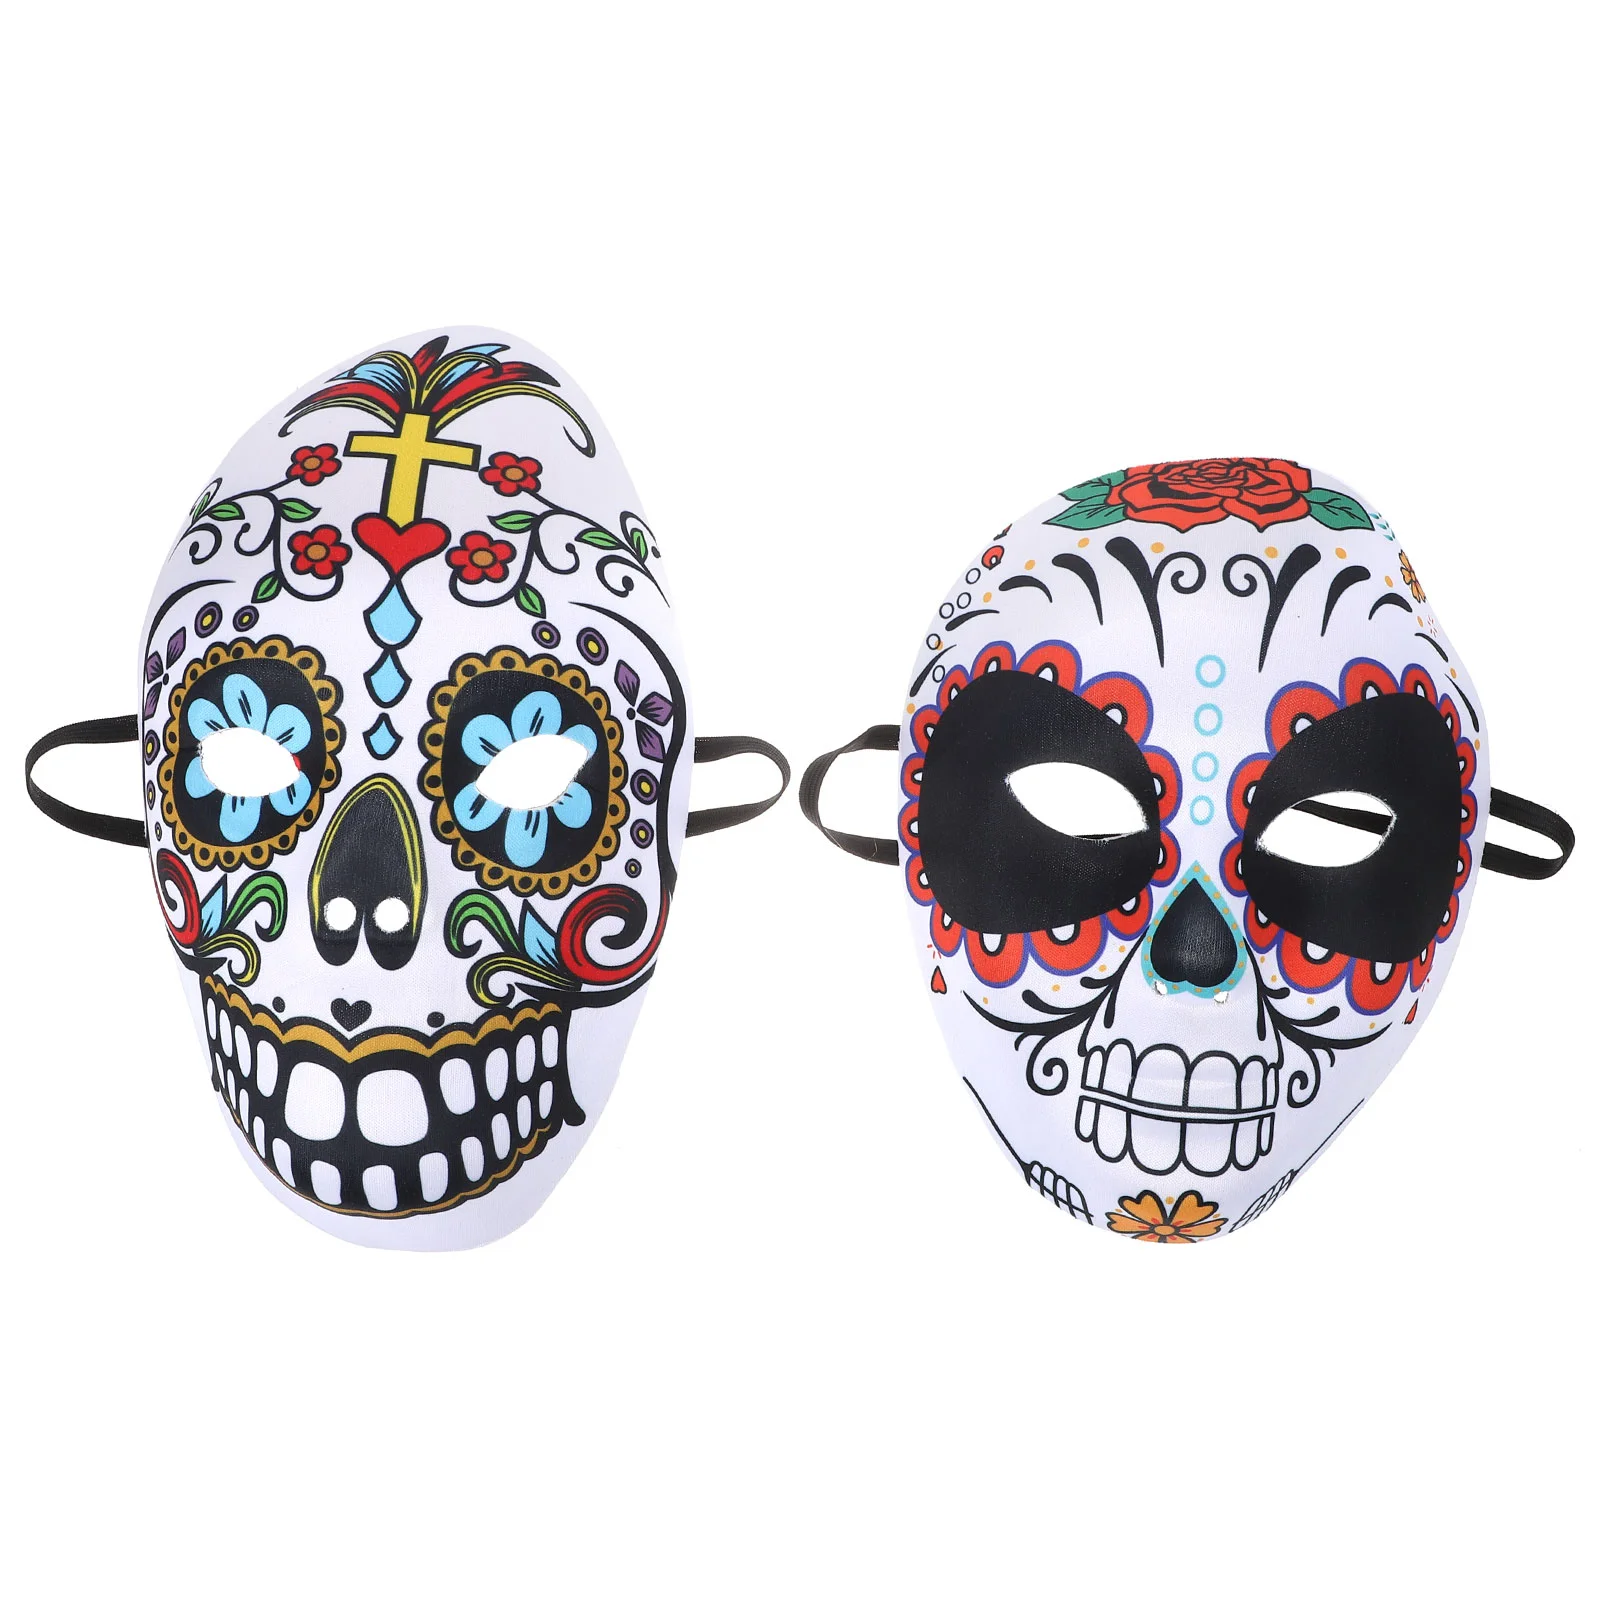 

Mexican Masquerade Masks Masquerade EVA Skull Costume Full Face Masks Mexican Day Of The Dead Party Masks